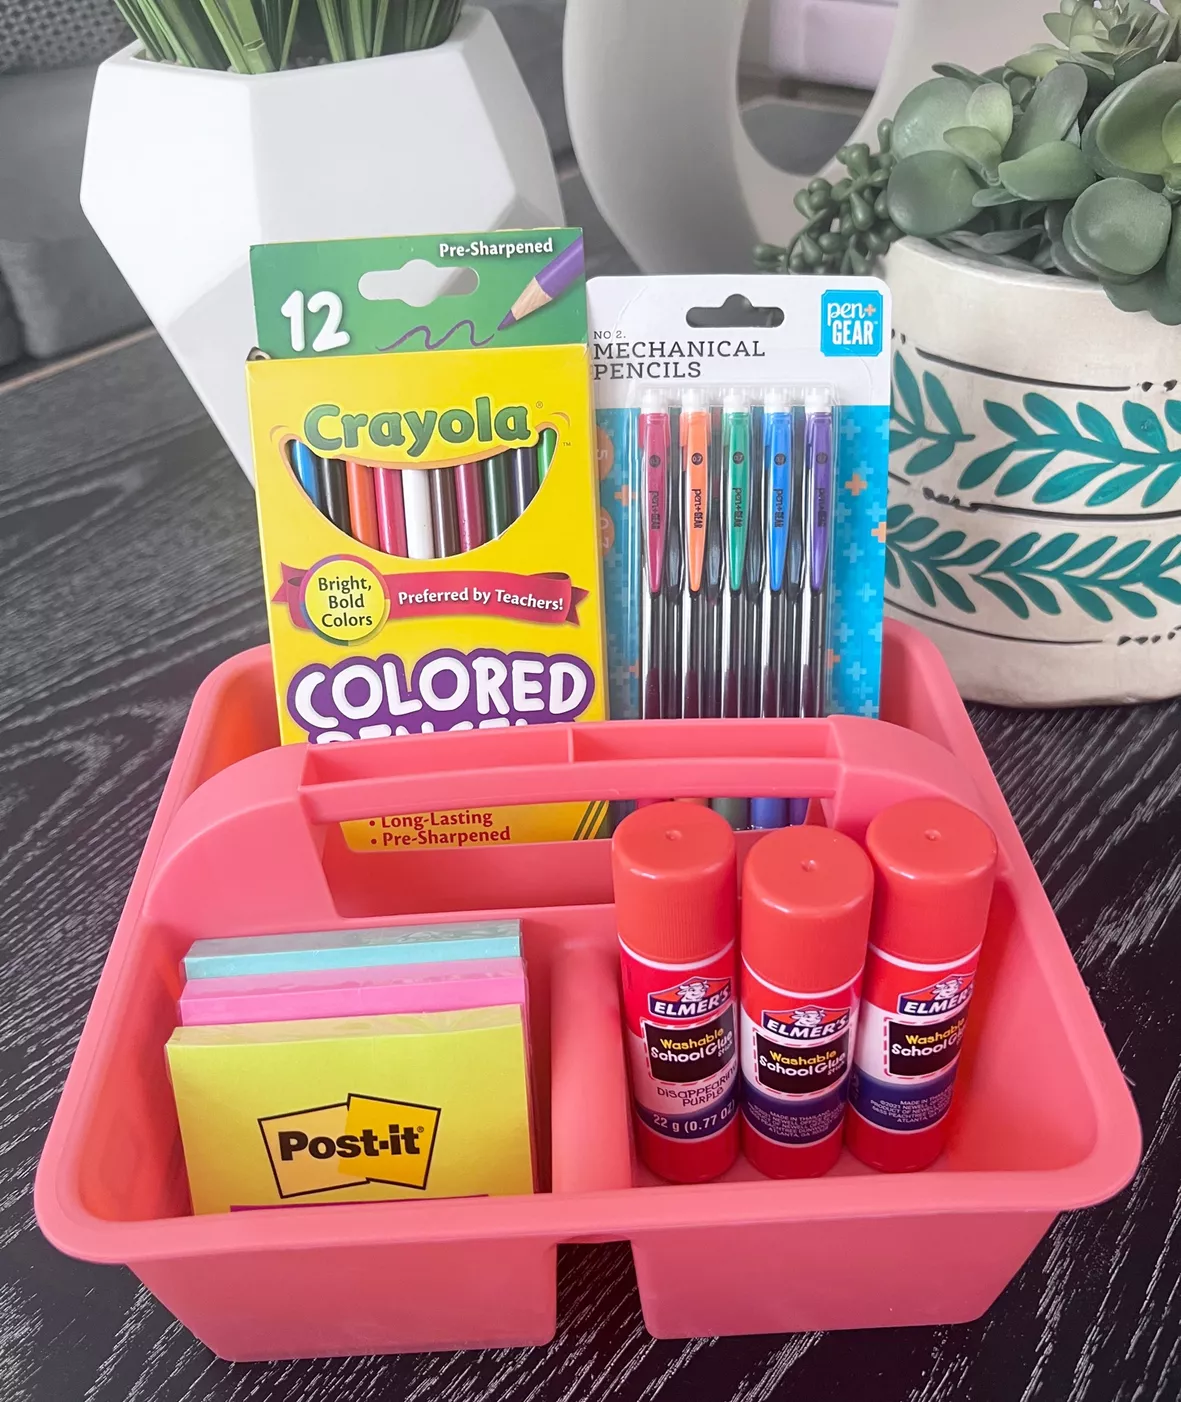 a new box of crayons, it's been a looooong time since I had…